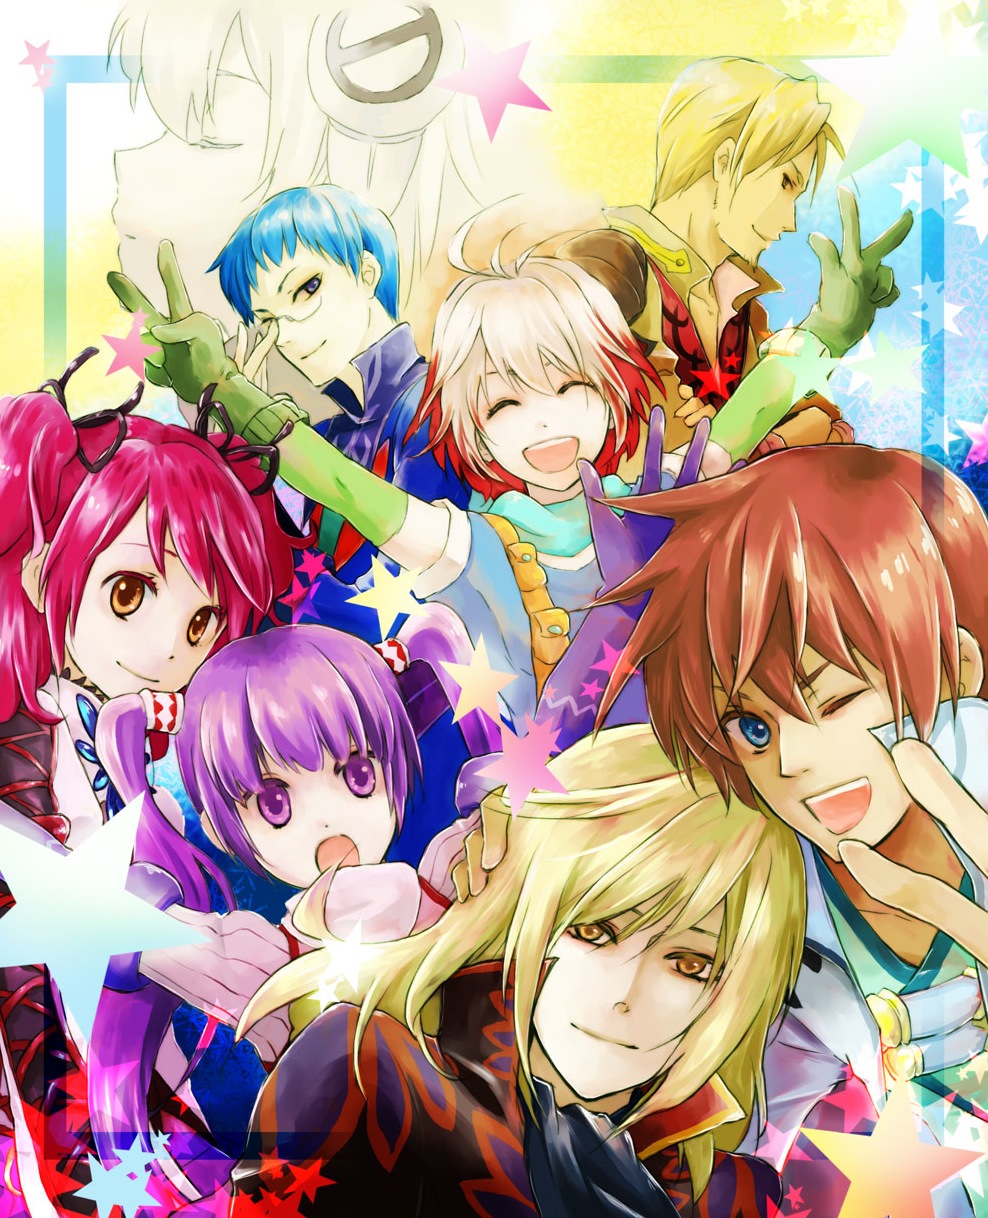 5boys asbel_lhant blonde_hair blue_eyes blue_hair brown_eyes brown_hair cheria_barnes glasses highres hubert_ozwell lambda malik_caesars multicolored_hair multiple_boys multiple_girls pascal pink_hair purple_eyes purple_hair red_hair redhead richard_(tales_of_graces) sophie_(tales_of_graces) takamizawa_takumi tales_of_(series) tales_of_graces twintails two-tone_hair two_side_up v violet_eyes white_hair wink yellow_eyes